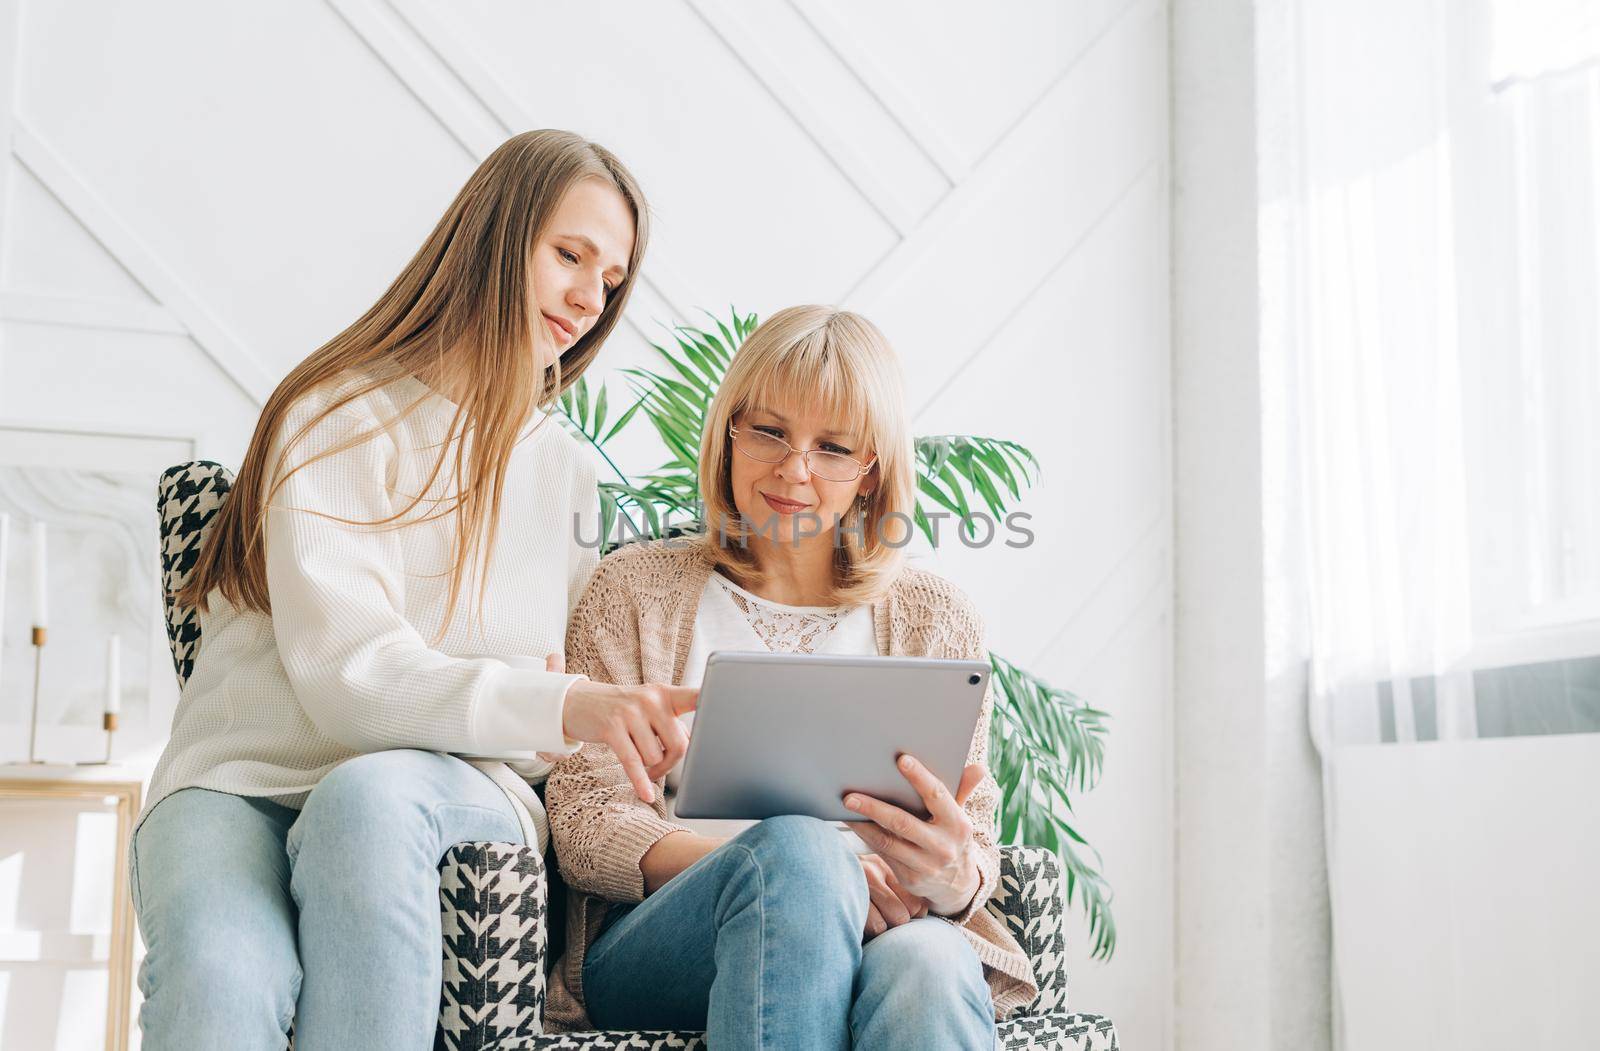 Senior woman and daughter playing with tablet pc. Smiling older woman and her granddaughter sitting home using gadget digital device for online shopping internet surfing video conference calling.